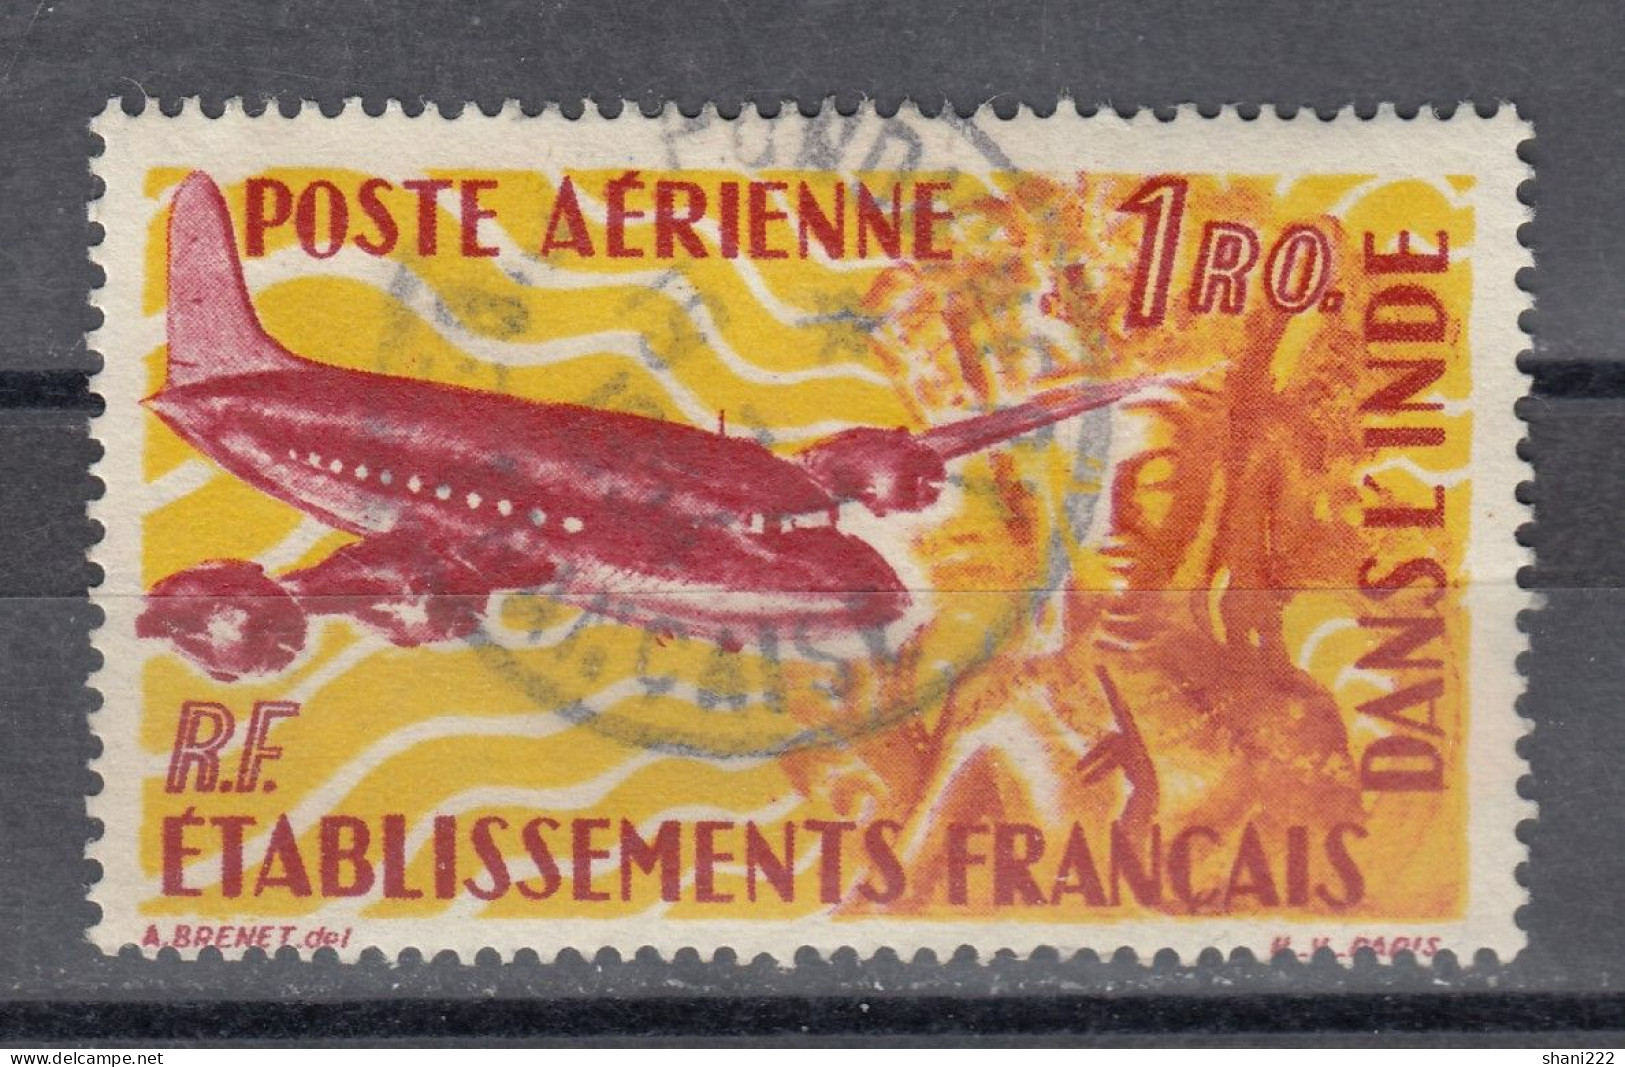 India - French Establishments, 1949 Airs  2 Ro Used  (e-219) - Used Stamps